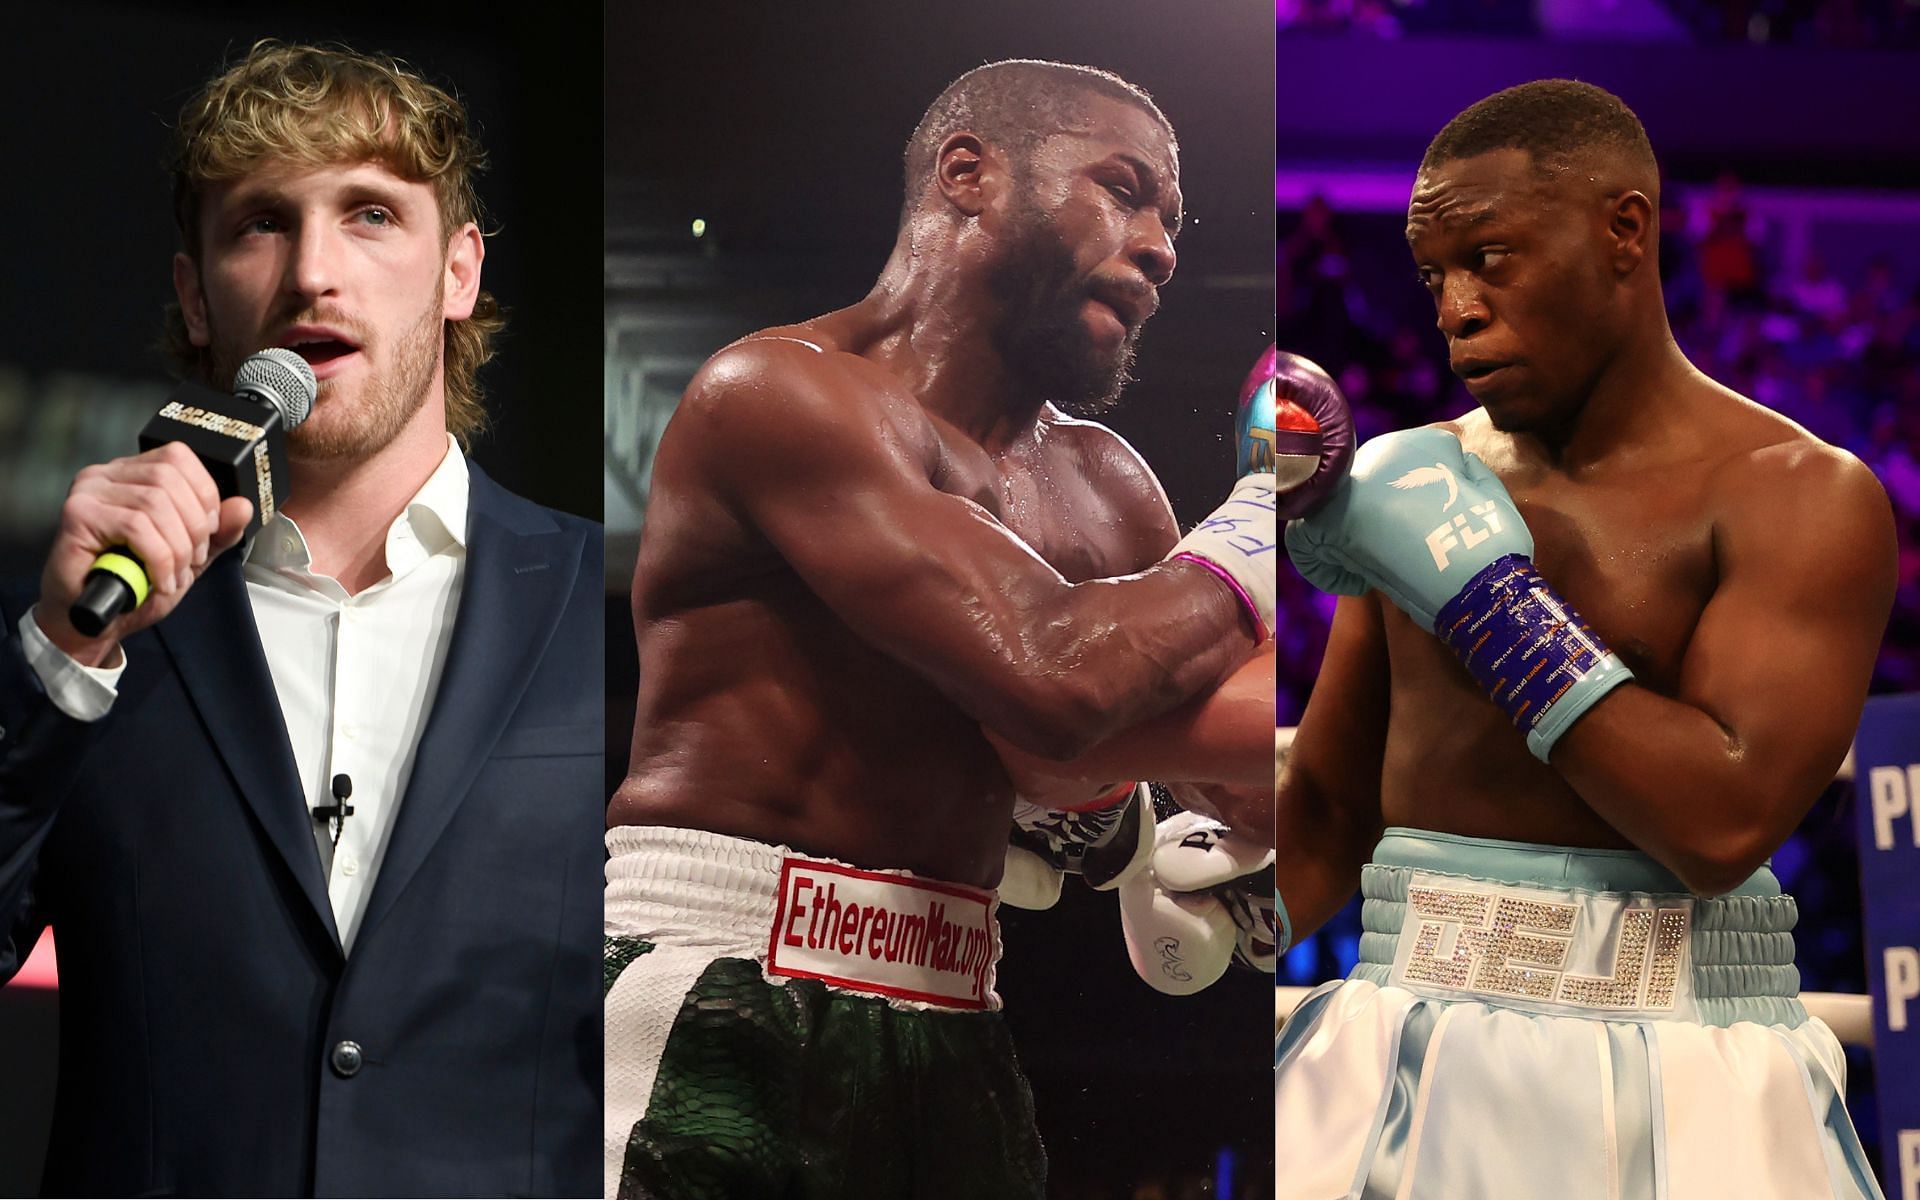 Logan Paul (left) Floyd Mayweather (center), and Deji (right) (Image credits Getty Images)